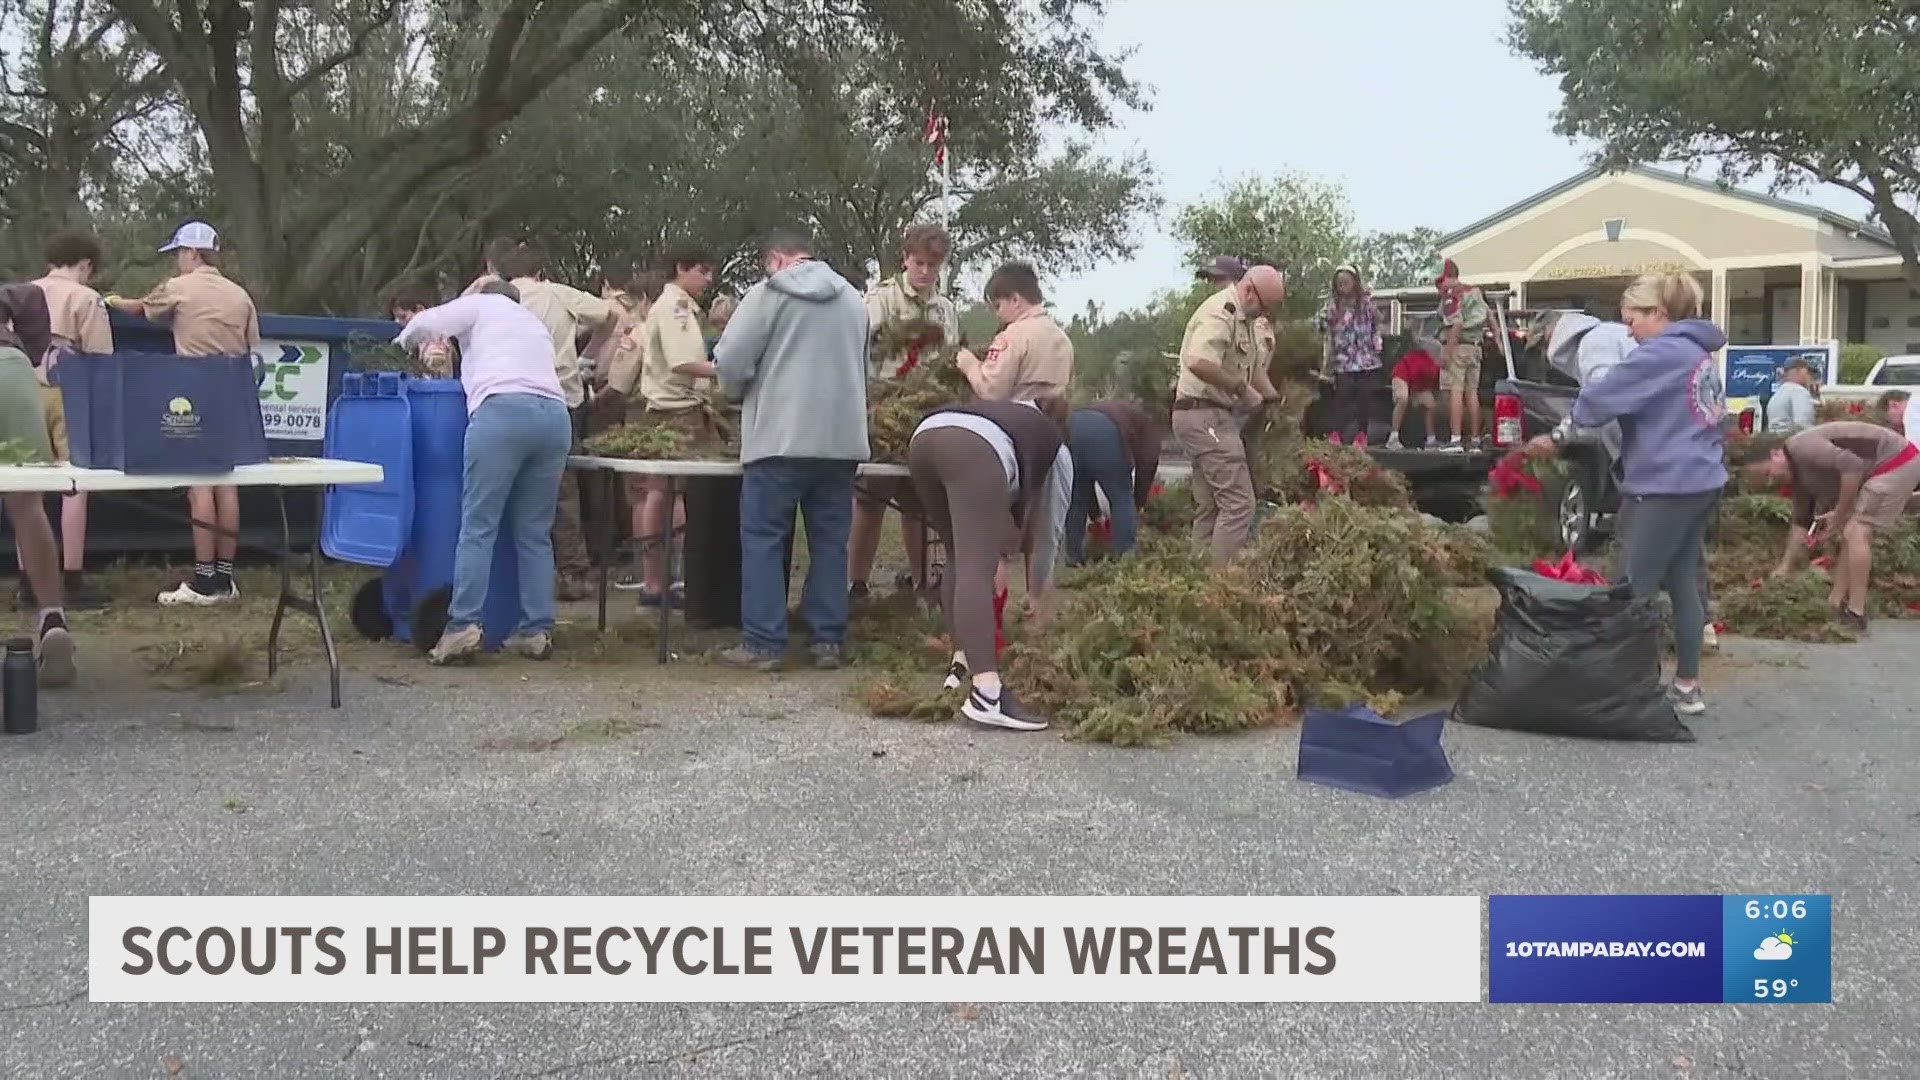 The wreaths were all collected from the graves, loaded up and then disassembled piece by piece.